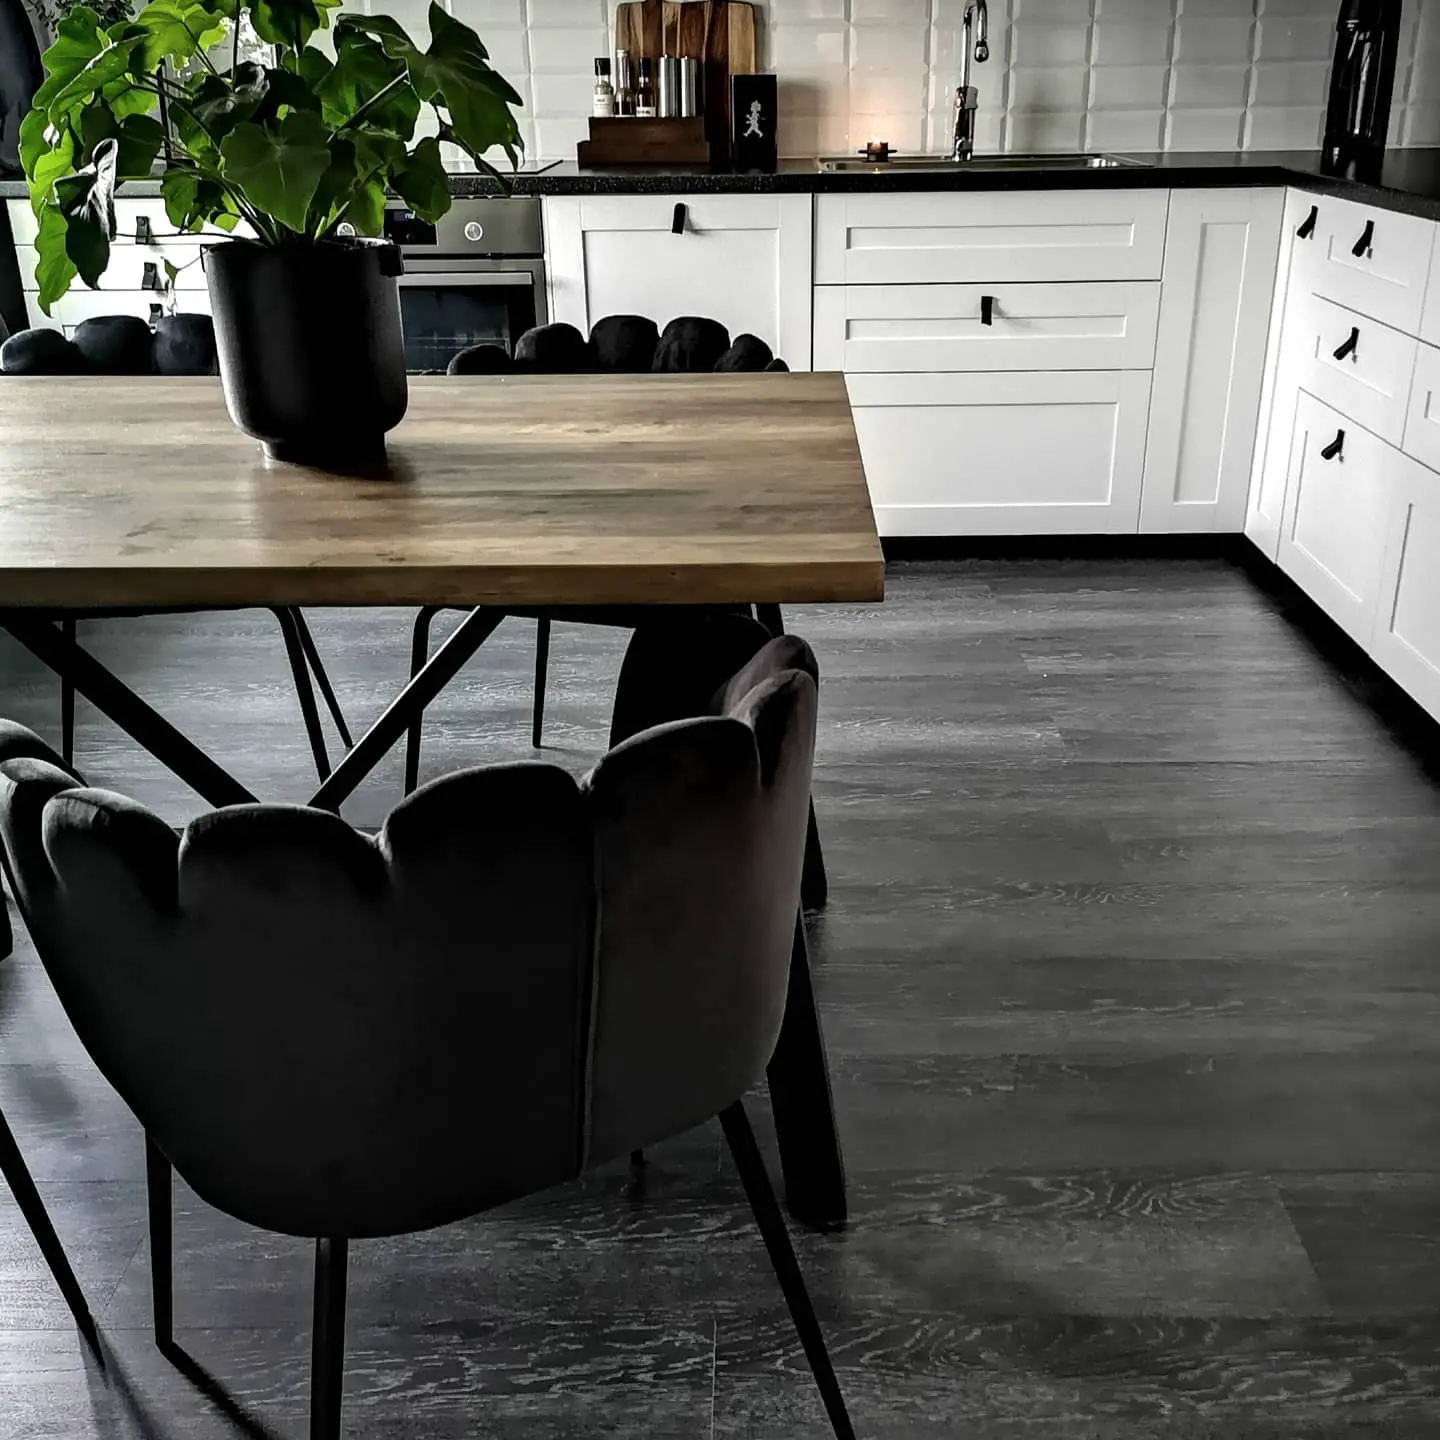 A black and white kitchen with a table and chairs featuring a black kitchen floor.